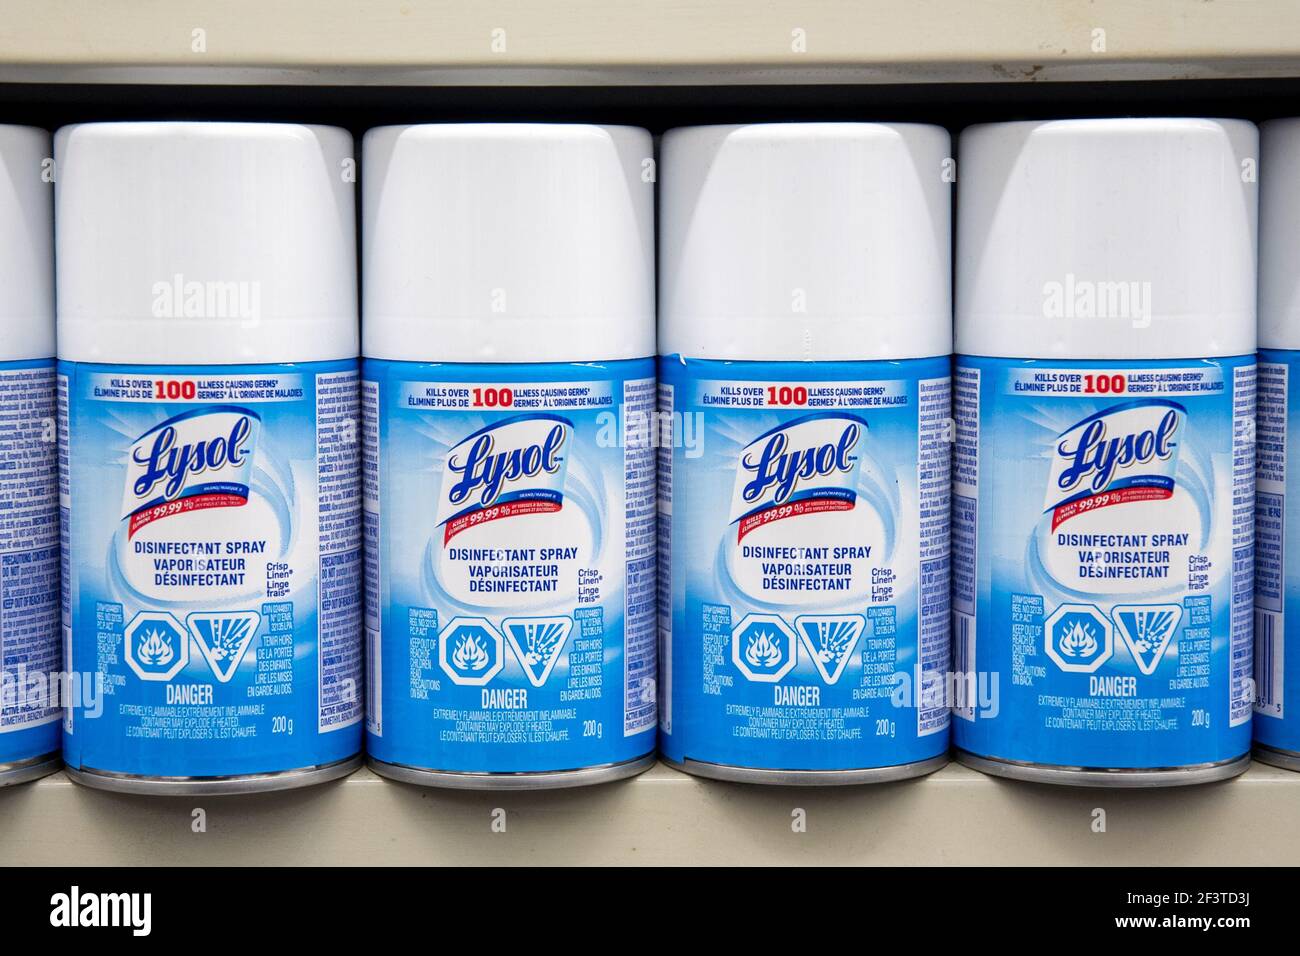 Containers of Lysol disinfectant on a store shelf Stock Photo